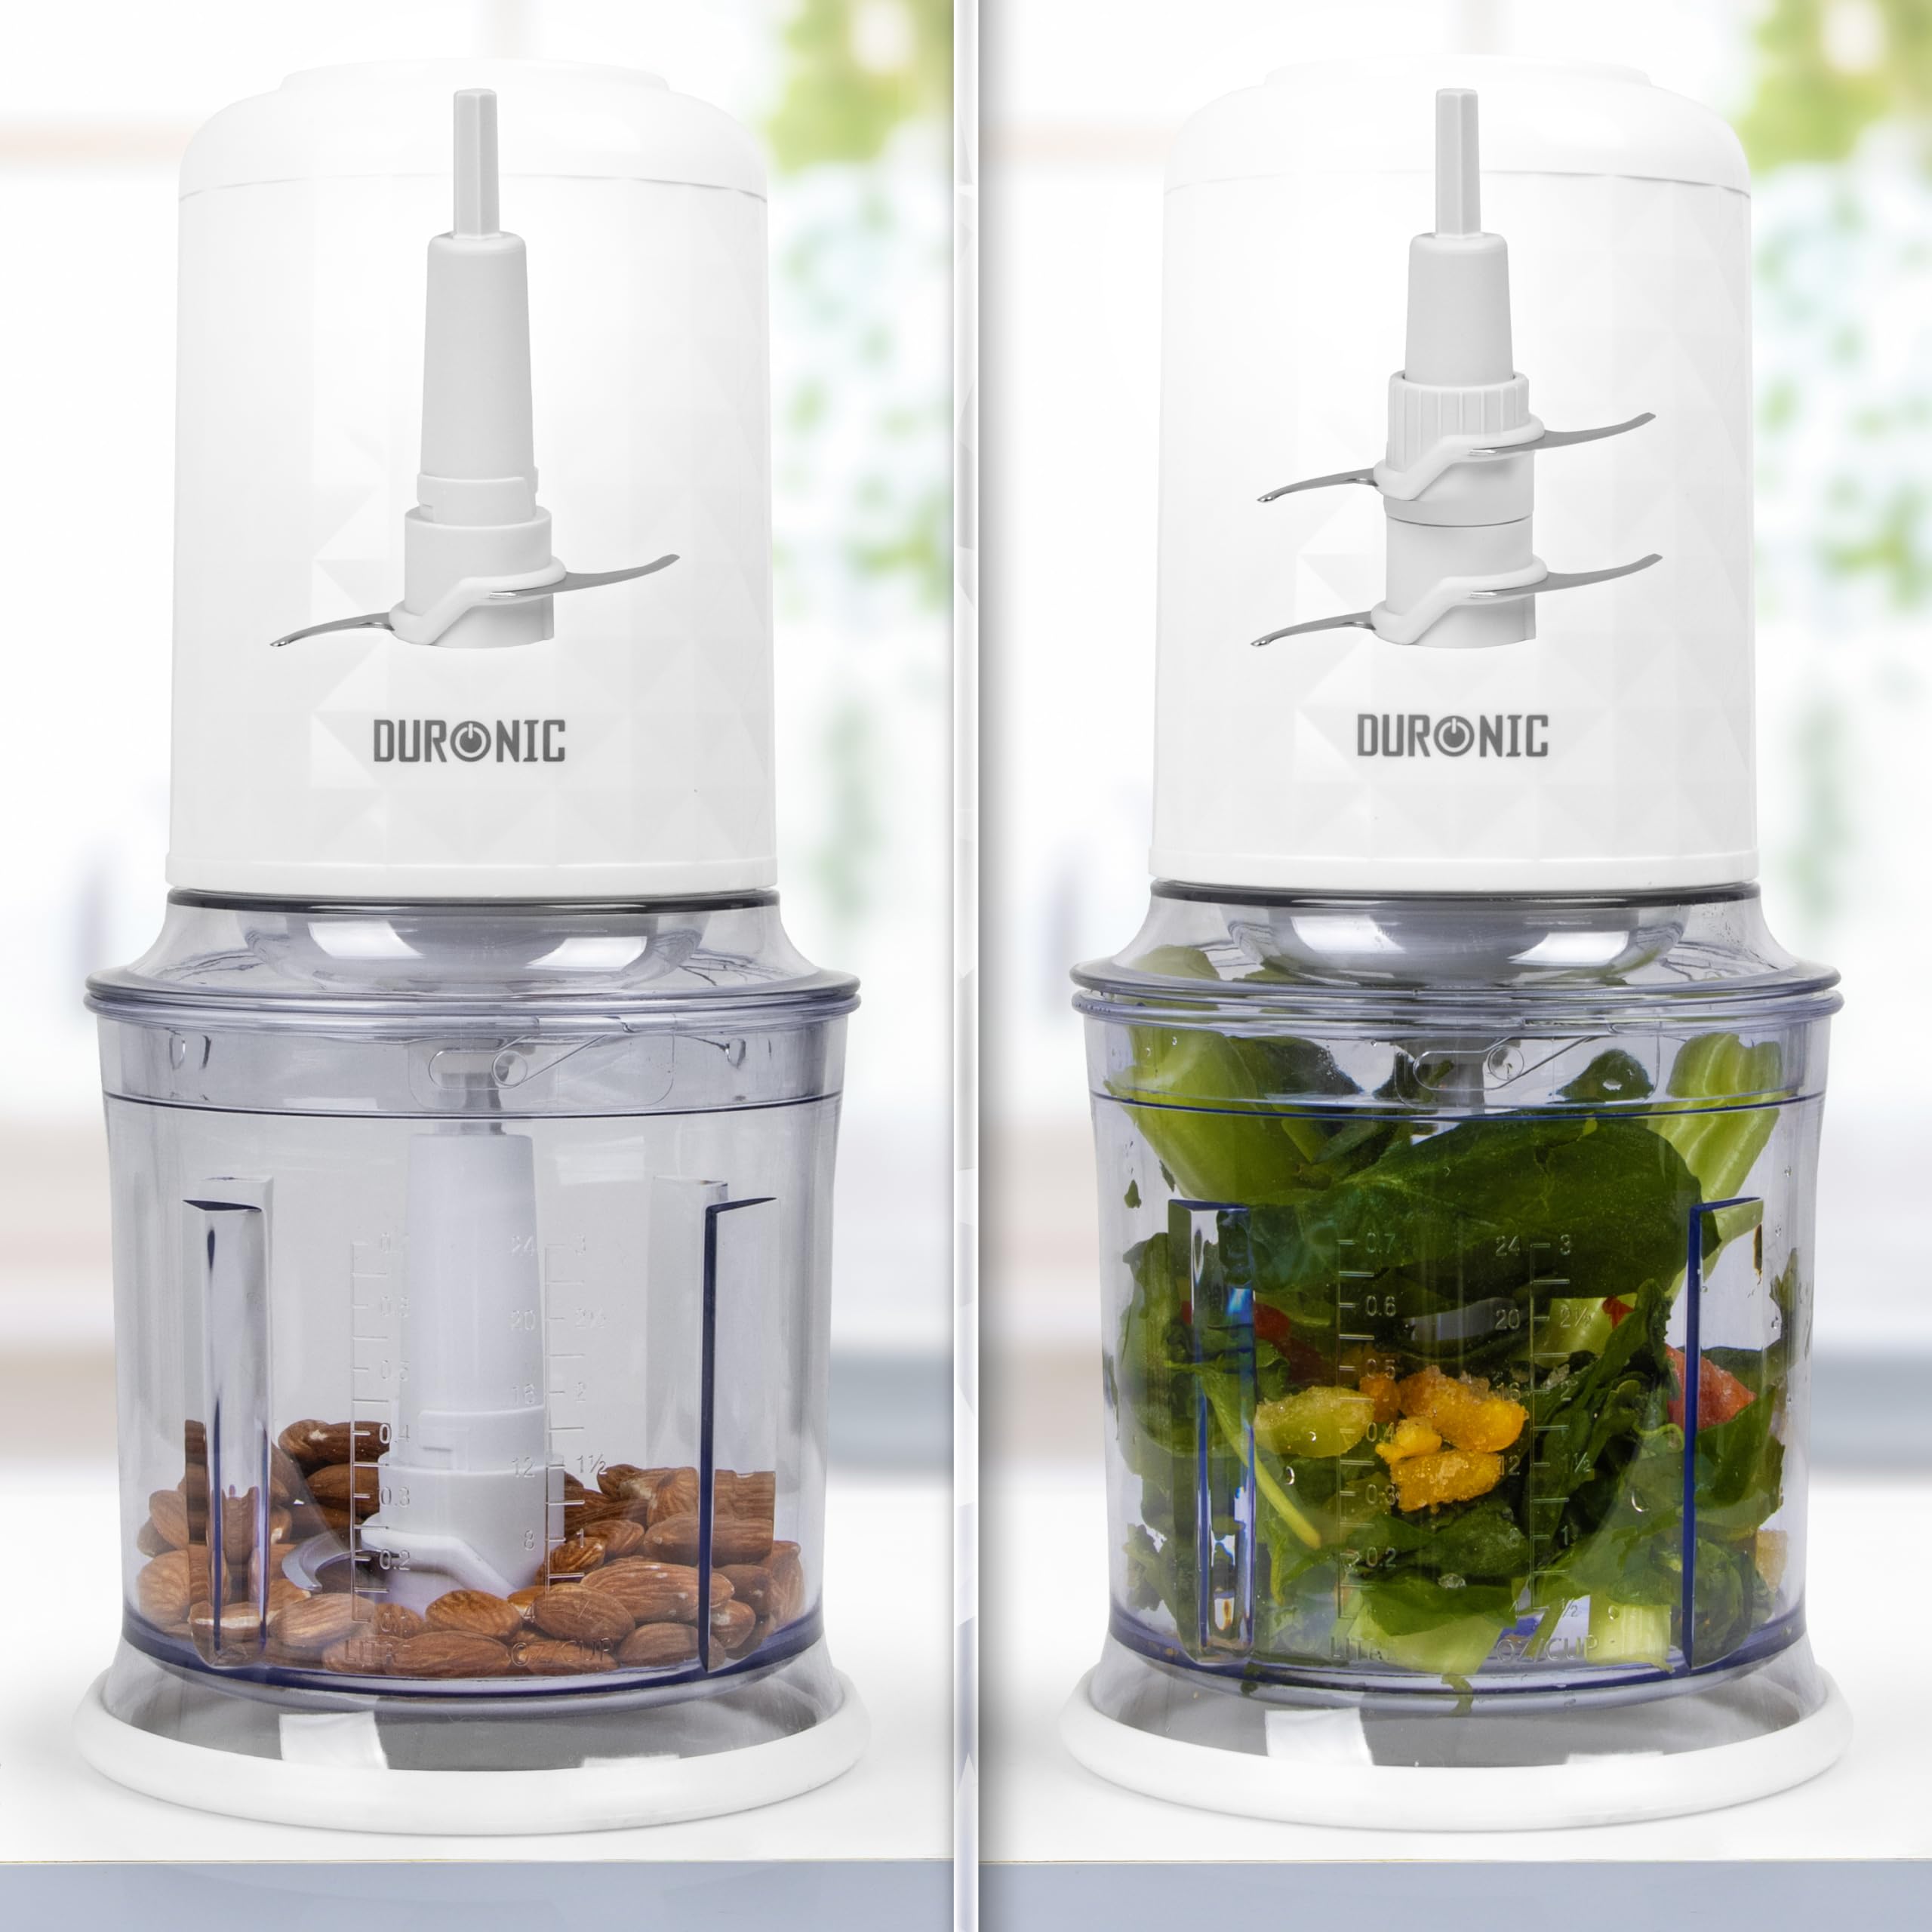 Duronic Mini Chopper | Mini Food Processor CH57 White | 500W | vegetable Slicer, Baby Food Maker, Vegetable Chopper | 2 x 700ml Blender Bowl with Lid | Quad Stainless Steel Blades - 500W